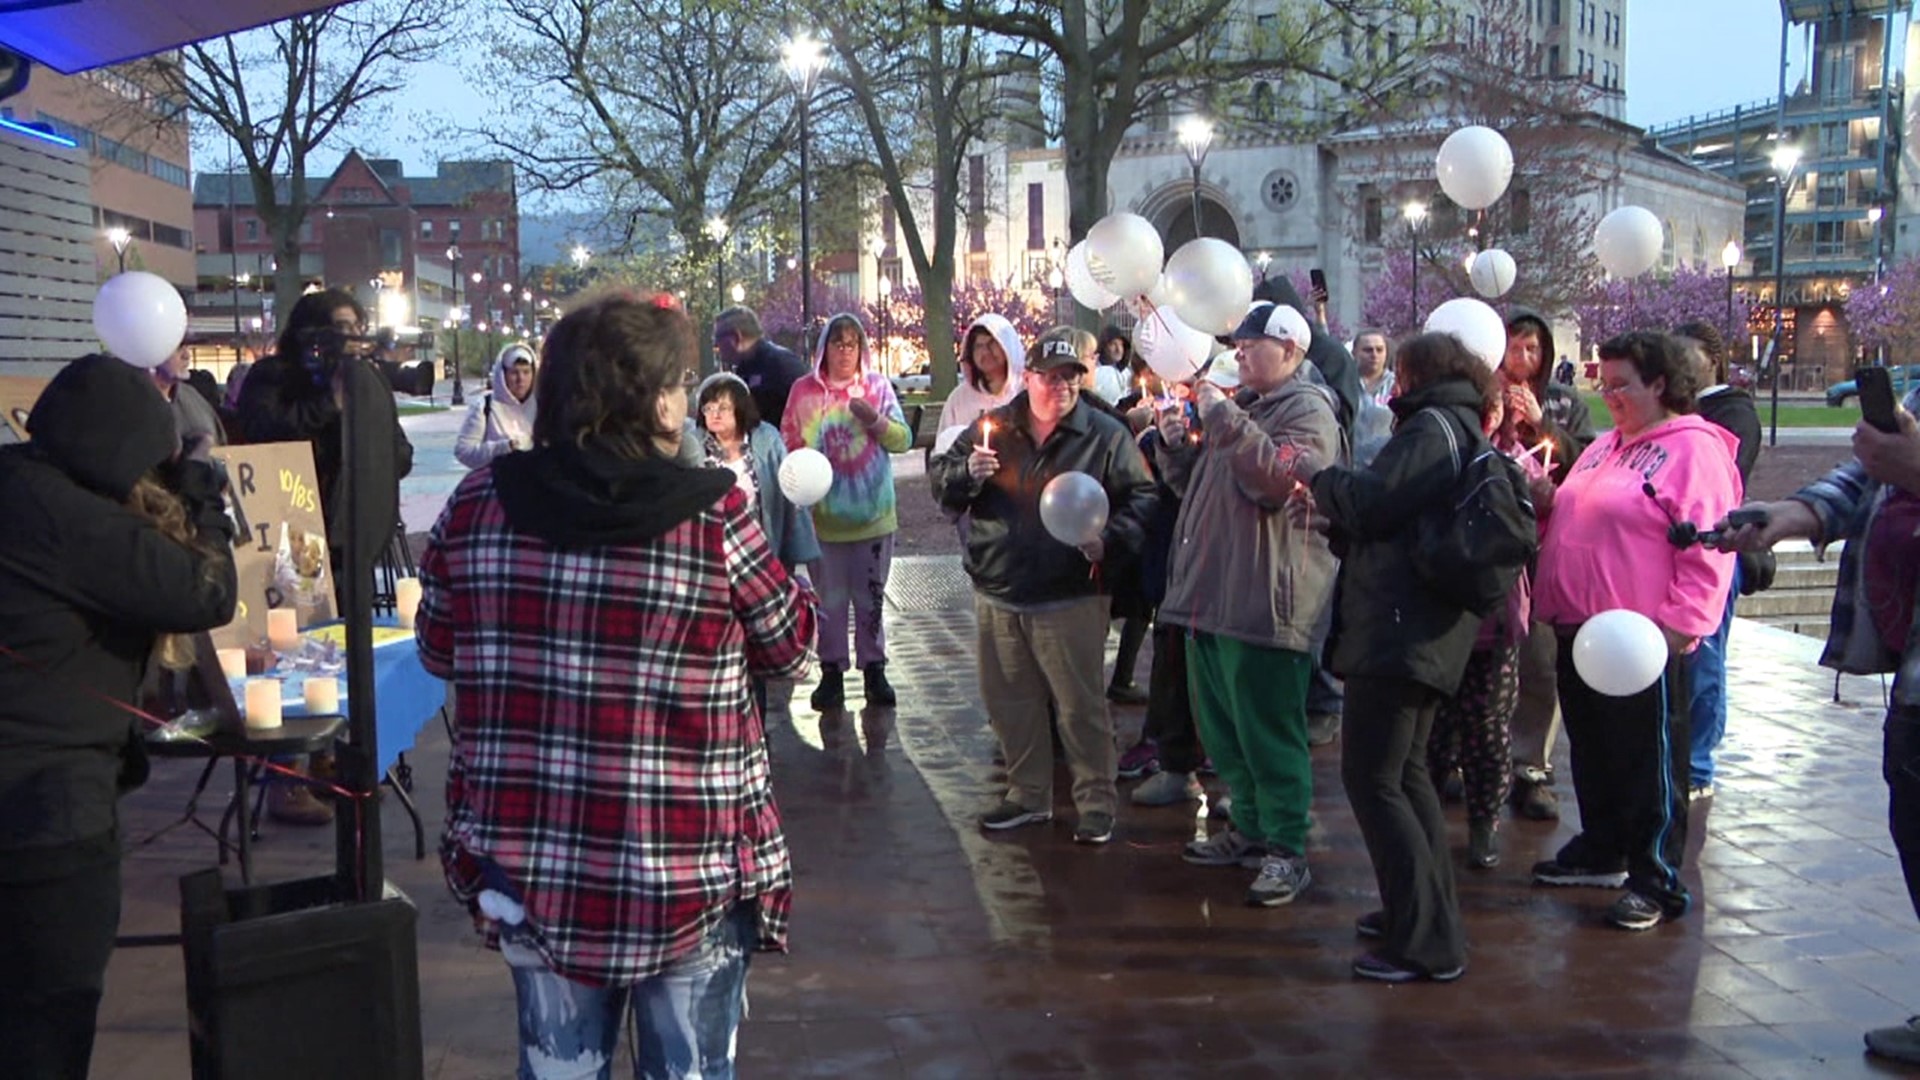 Friends and family gathered at the Public Square in Wilkes-Barre on Friday evening to remember Nicole Cuevas and Debra Fox.